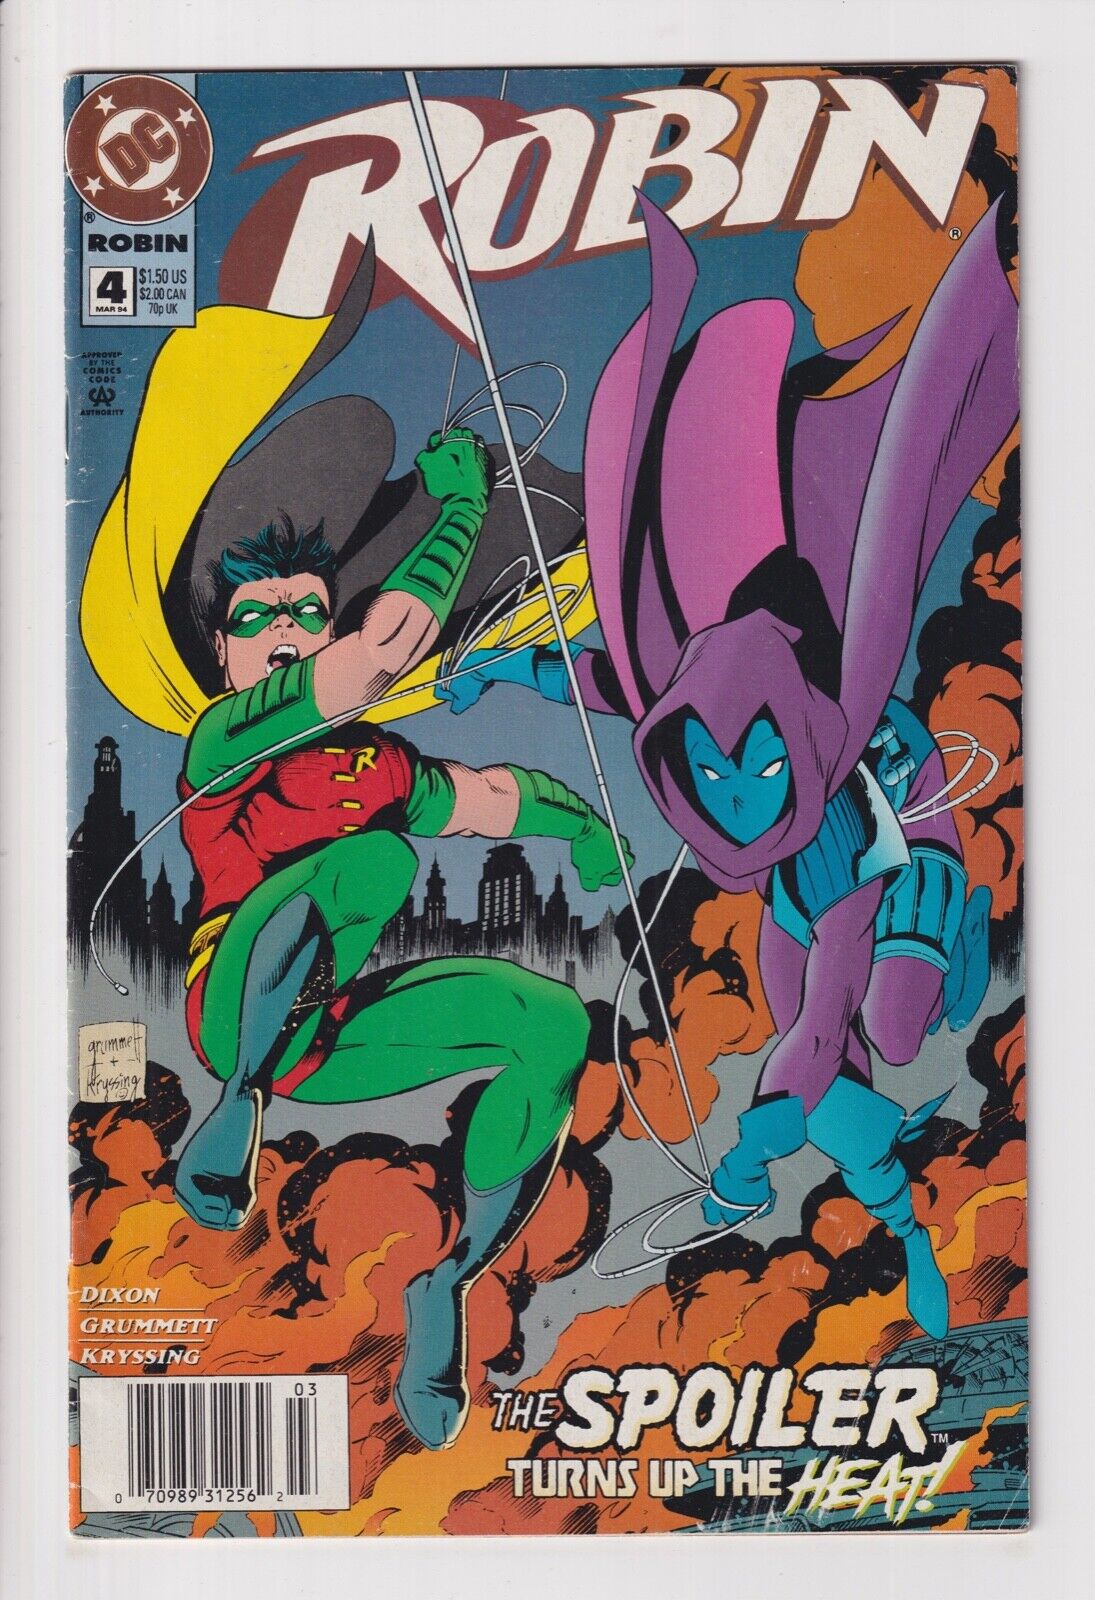 CLEARANCE BIN: ROBIN #1-183 VG DC comics sold SEPARATELY you PICK 0226